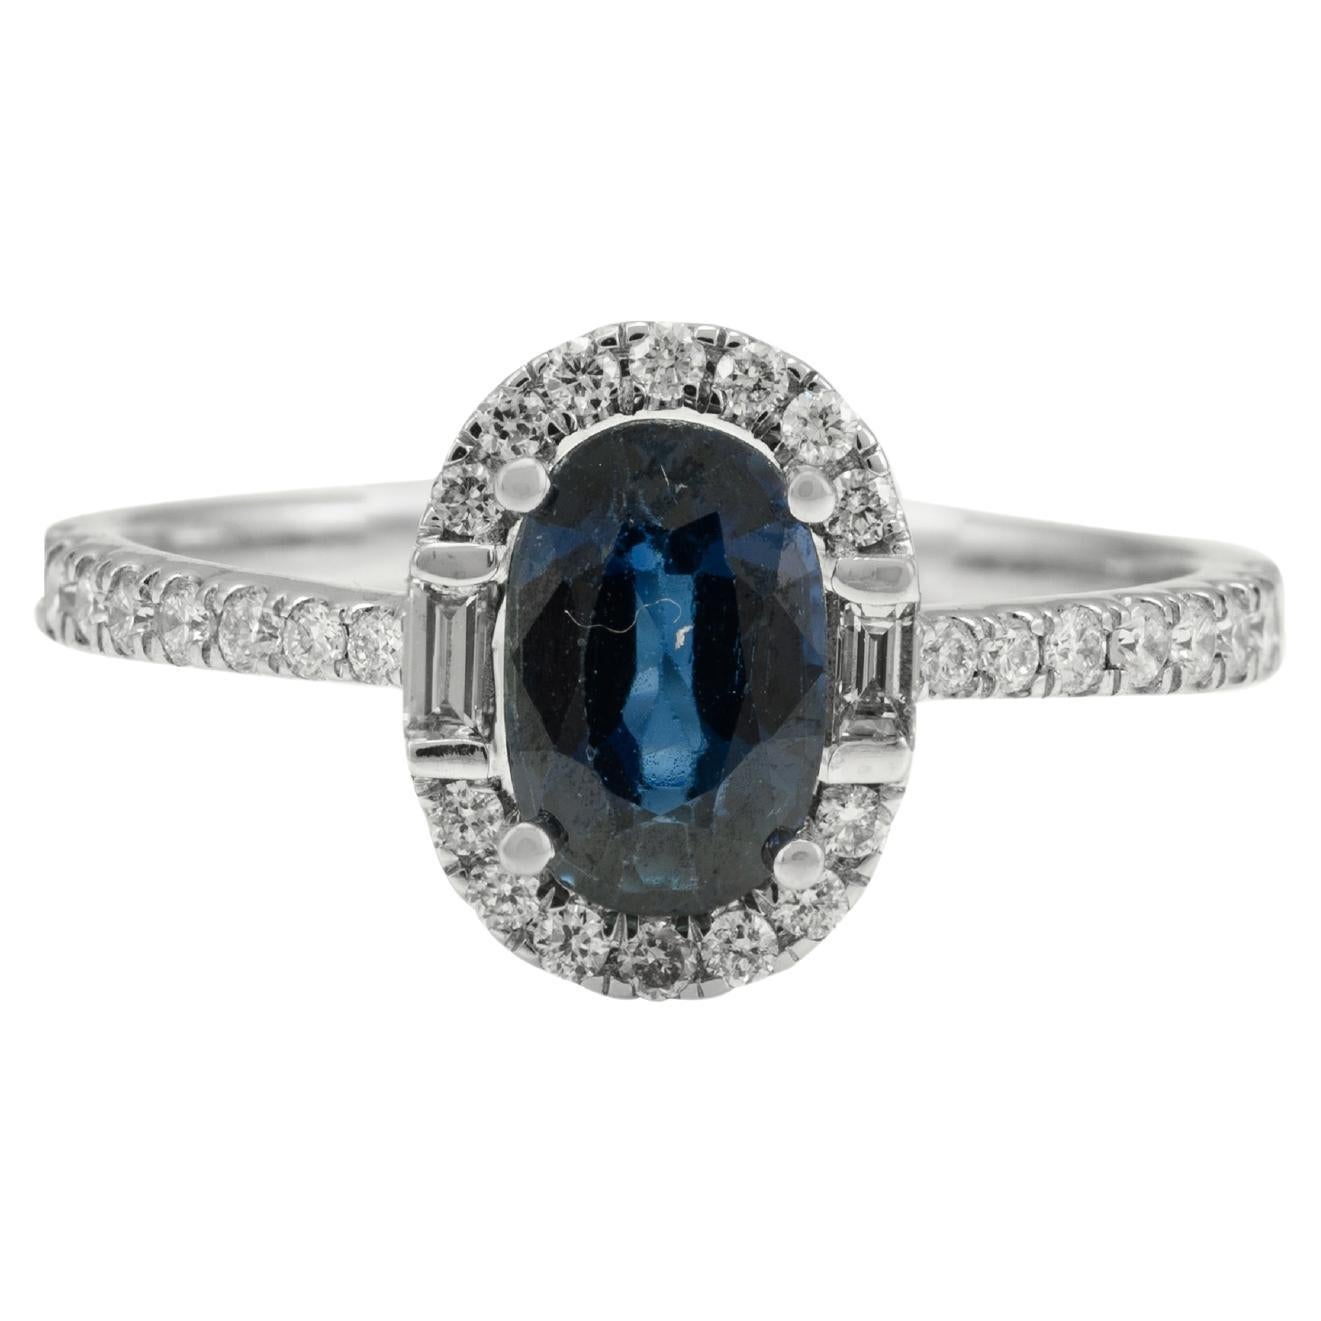 For Sale:  18k Solid White Gold Natural Diamond and Oval Deep Blue Sapphire Engagement Ring